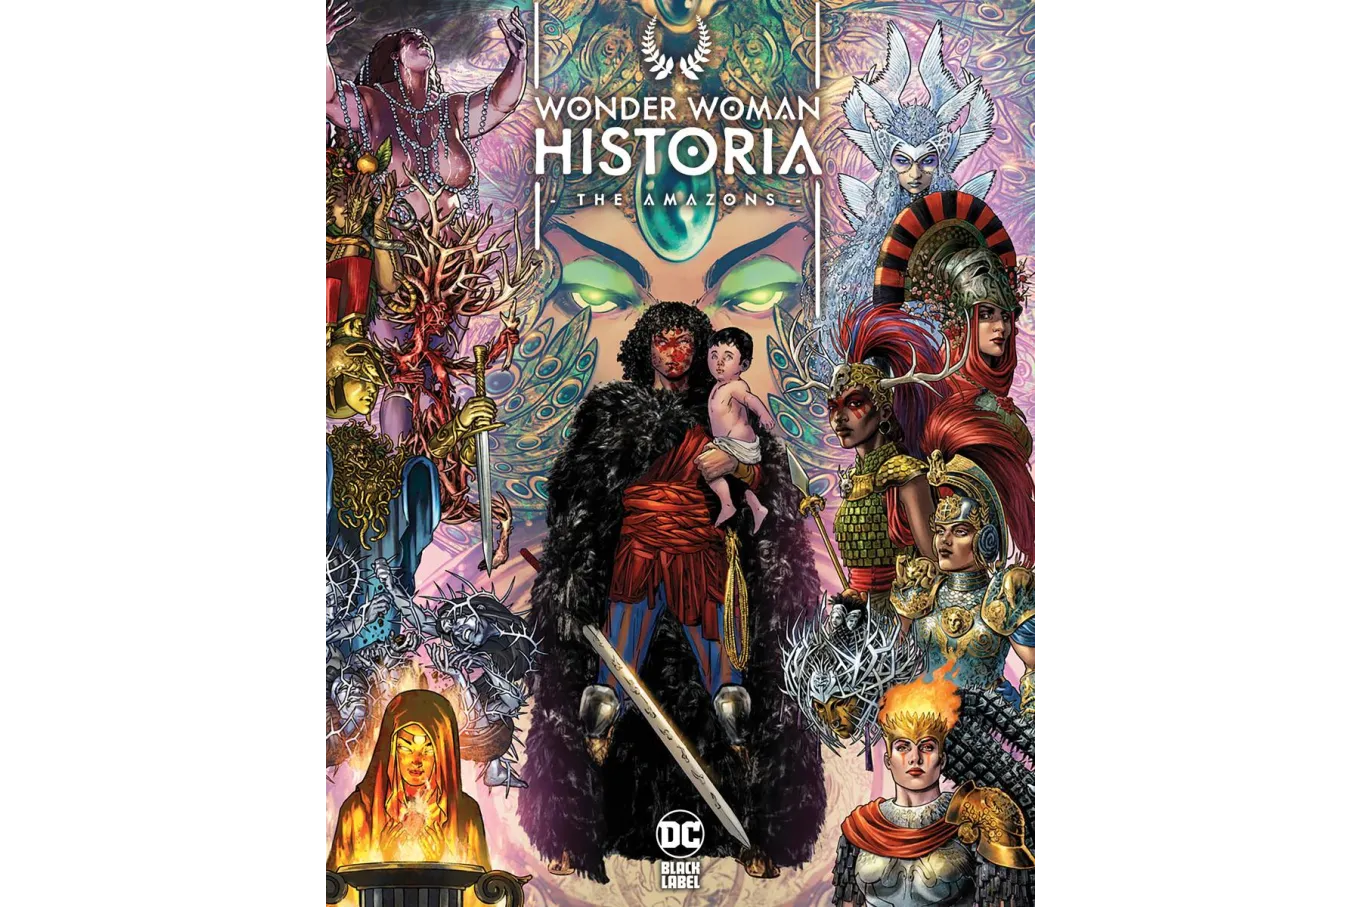 Cover of wonder woman historia